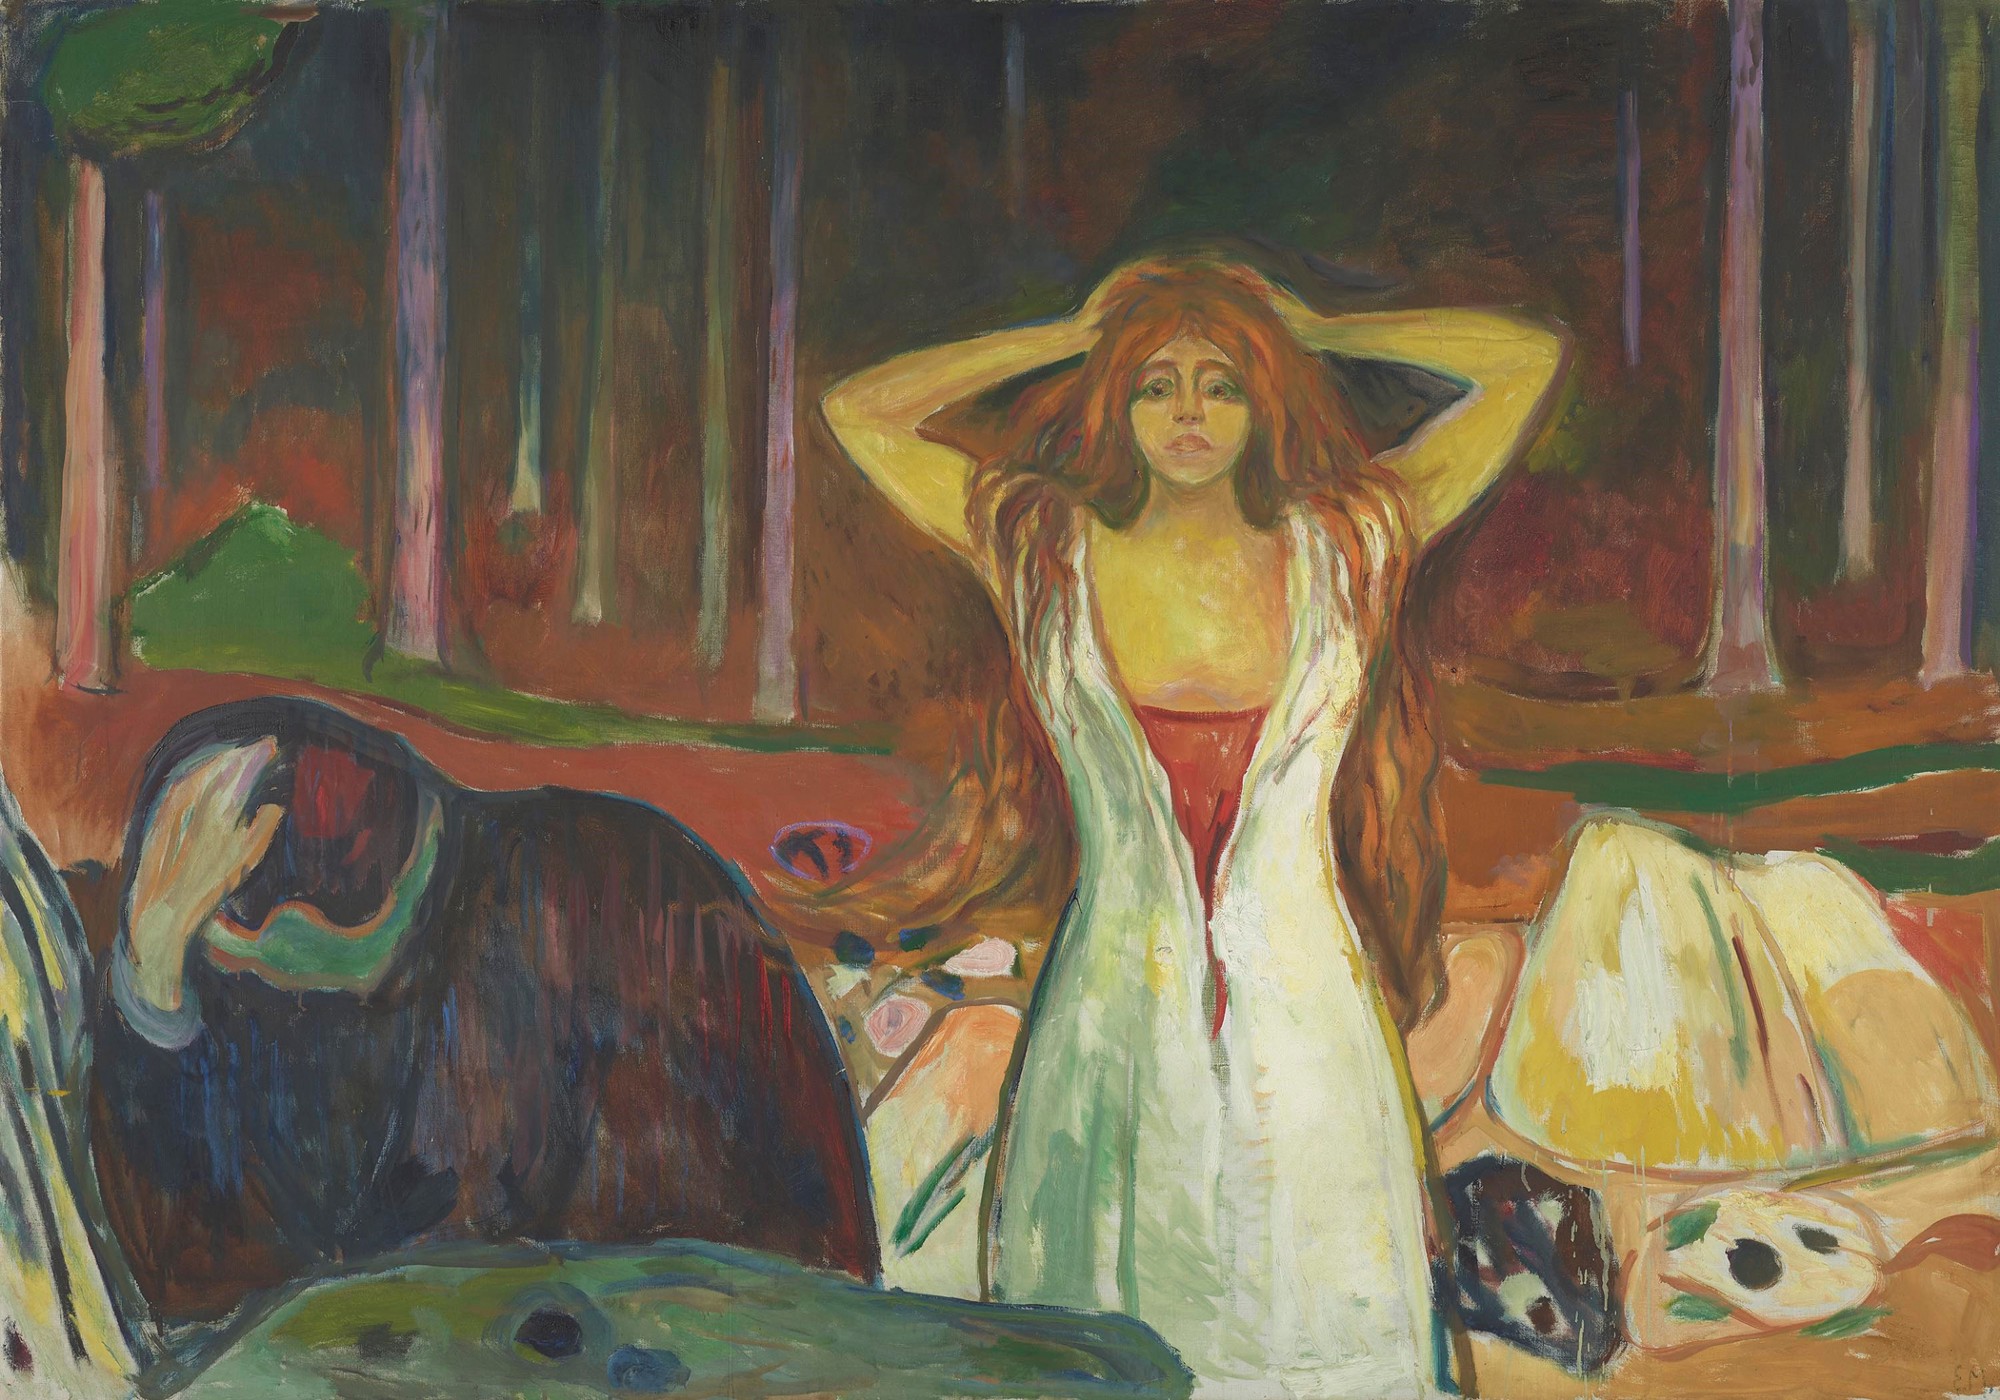 Ashes by Edvard Munch - 1894 - 200 x140 cm Munch Museum